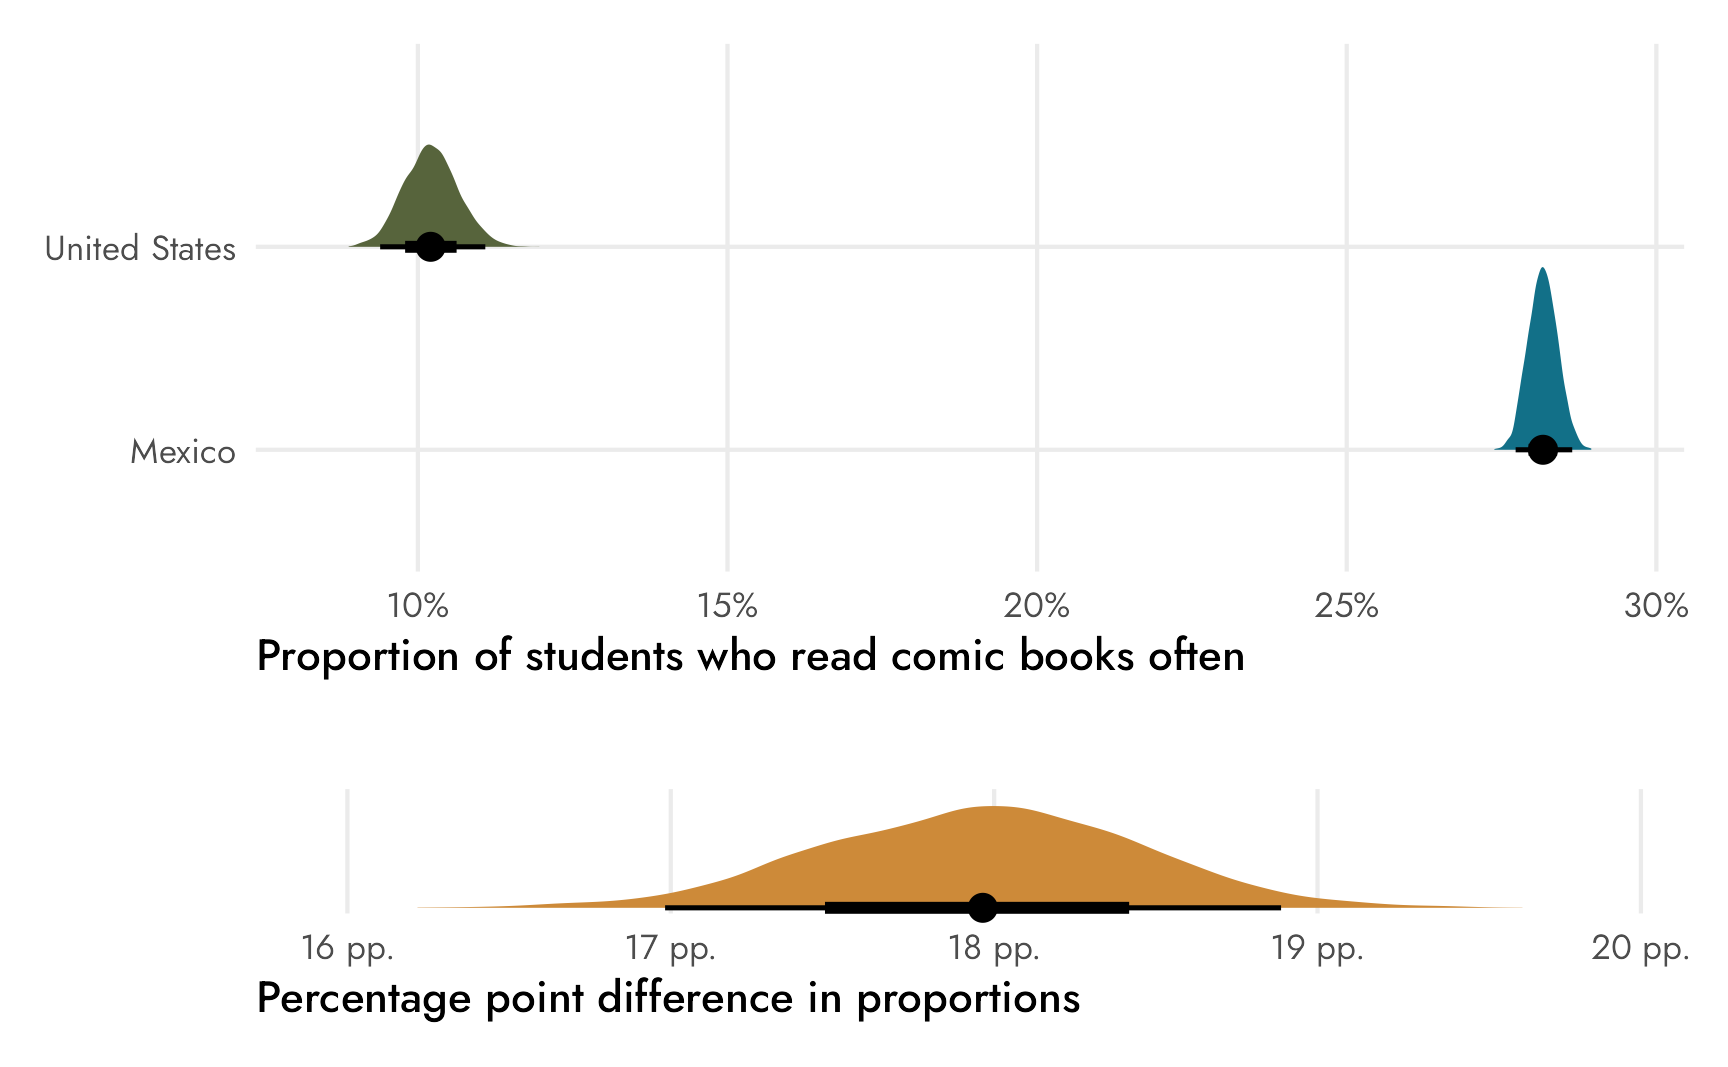 Posterior distribution of the proportions and difference in proportions of students who read comic books often in the United States and Mexico; results from an intercept-free binomial model with identity link in {brms}